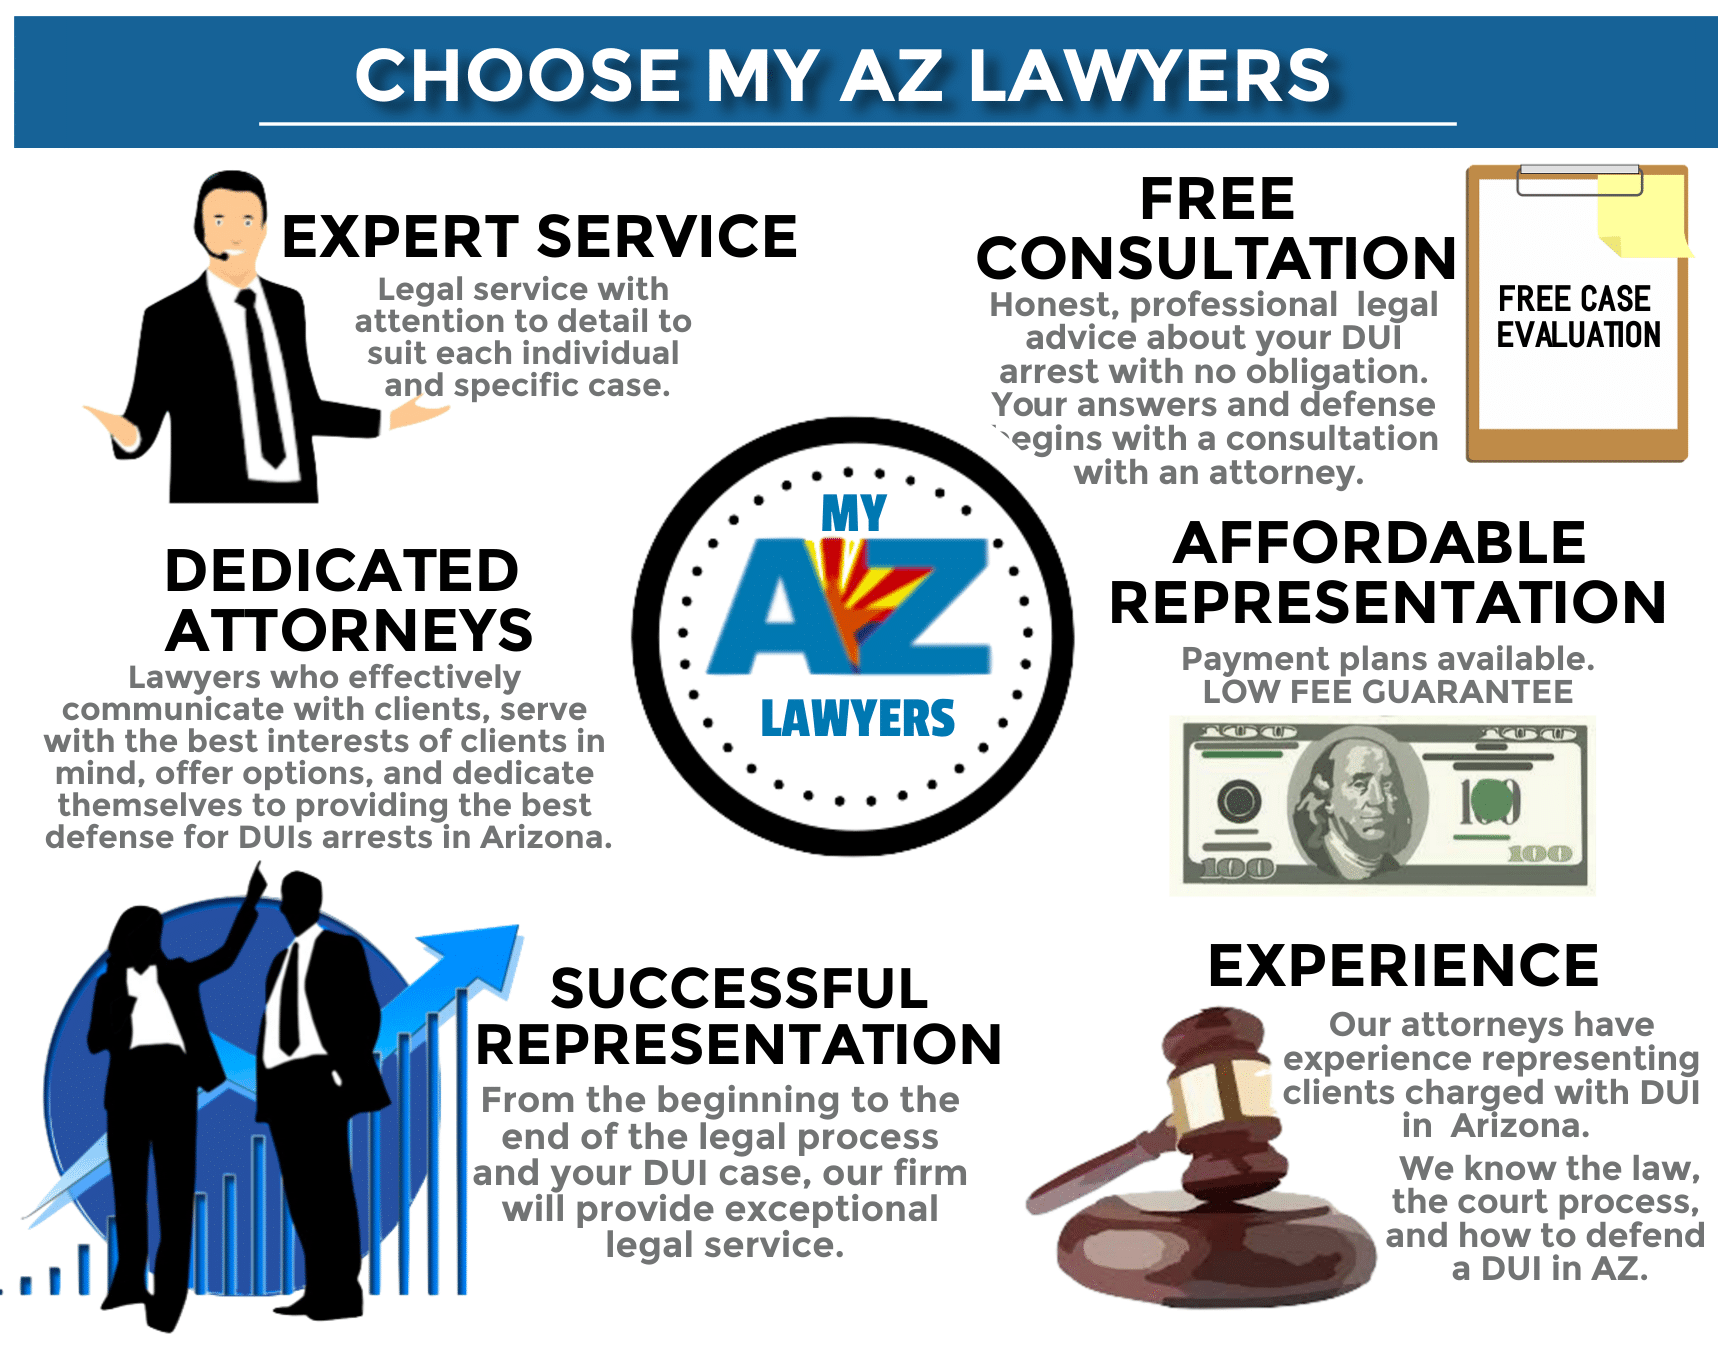 infographic: why choose MY AZ LAWYERS?